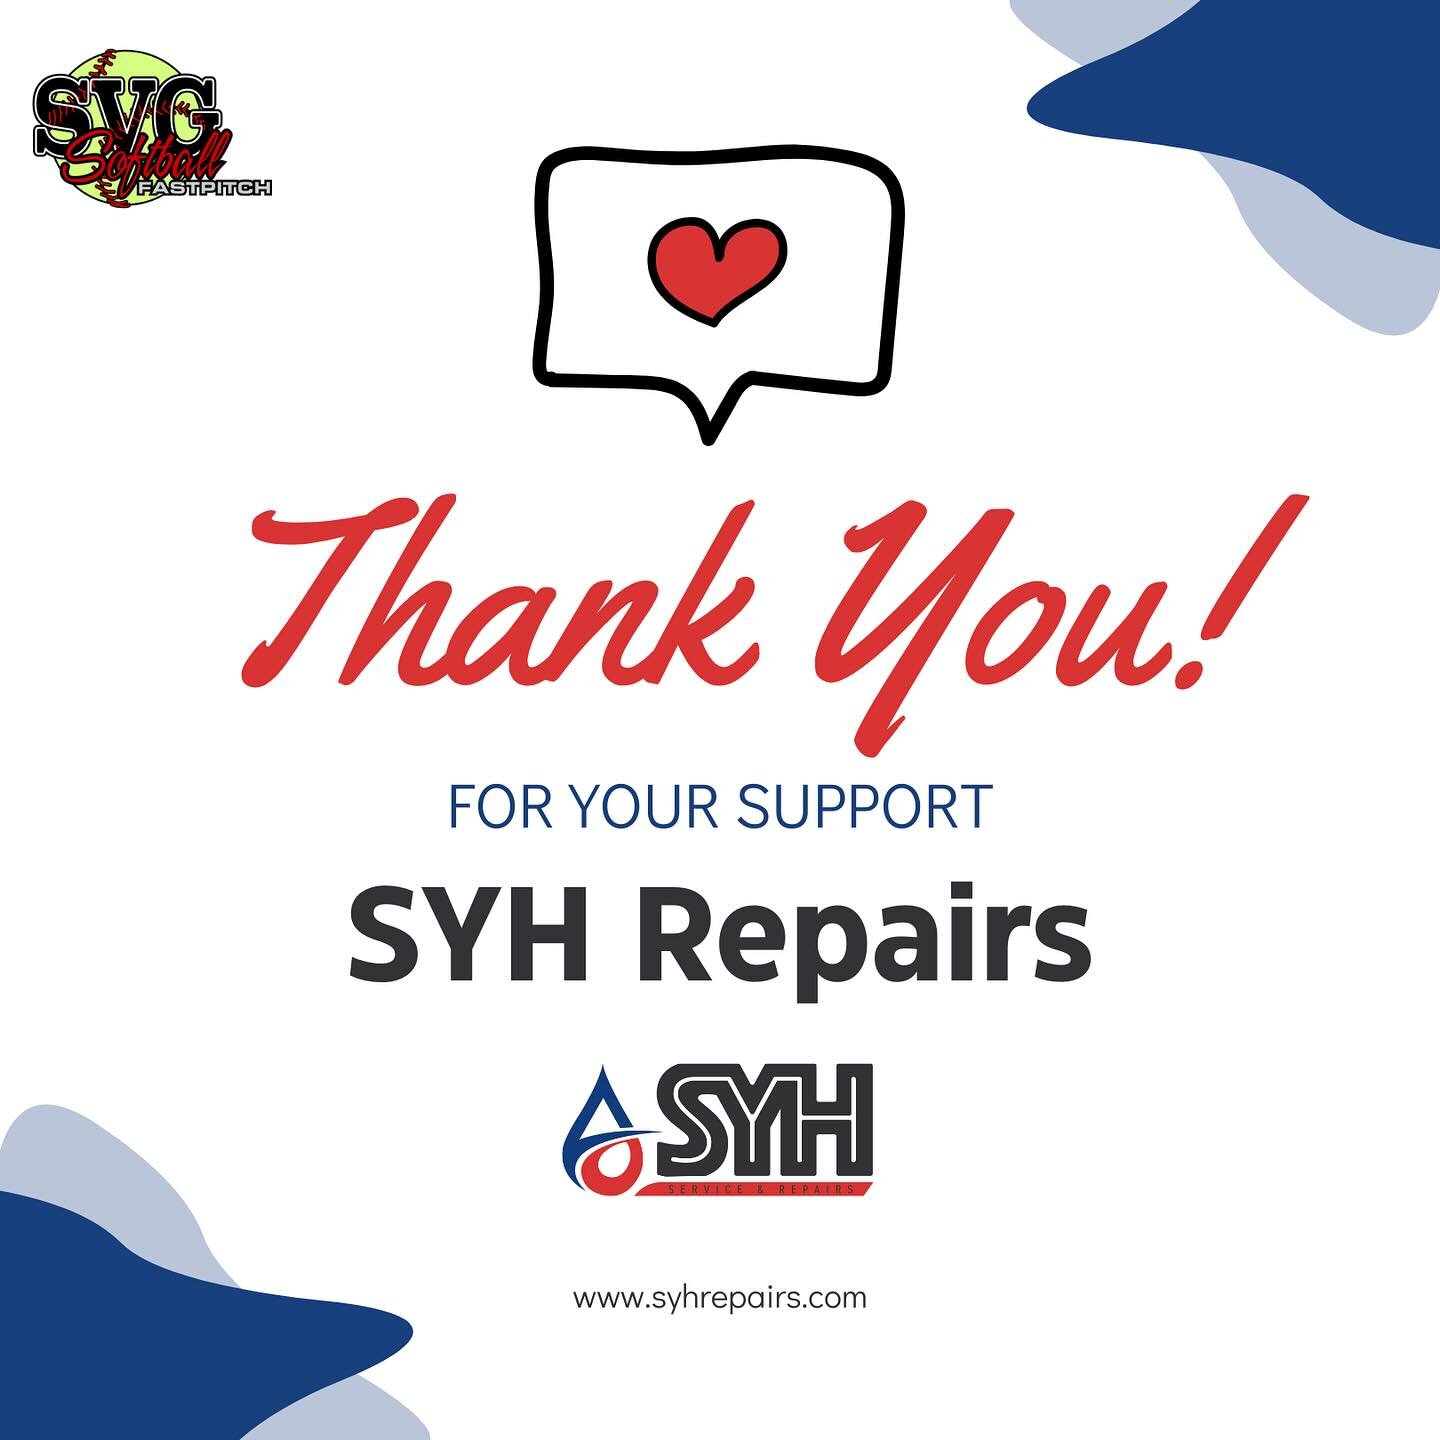 Huge shoutout to SYH Repairs for their support of both our 6U Itsy Bitsy Spiders 🕷️ AND our 12U Pitch Perfect 🤩 The league and the girls greatly appreciate your sponsorship this season! 🥎

Learn more about SYH at 🔗 www.syhrepairs.com!